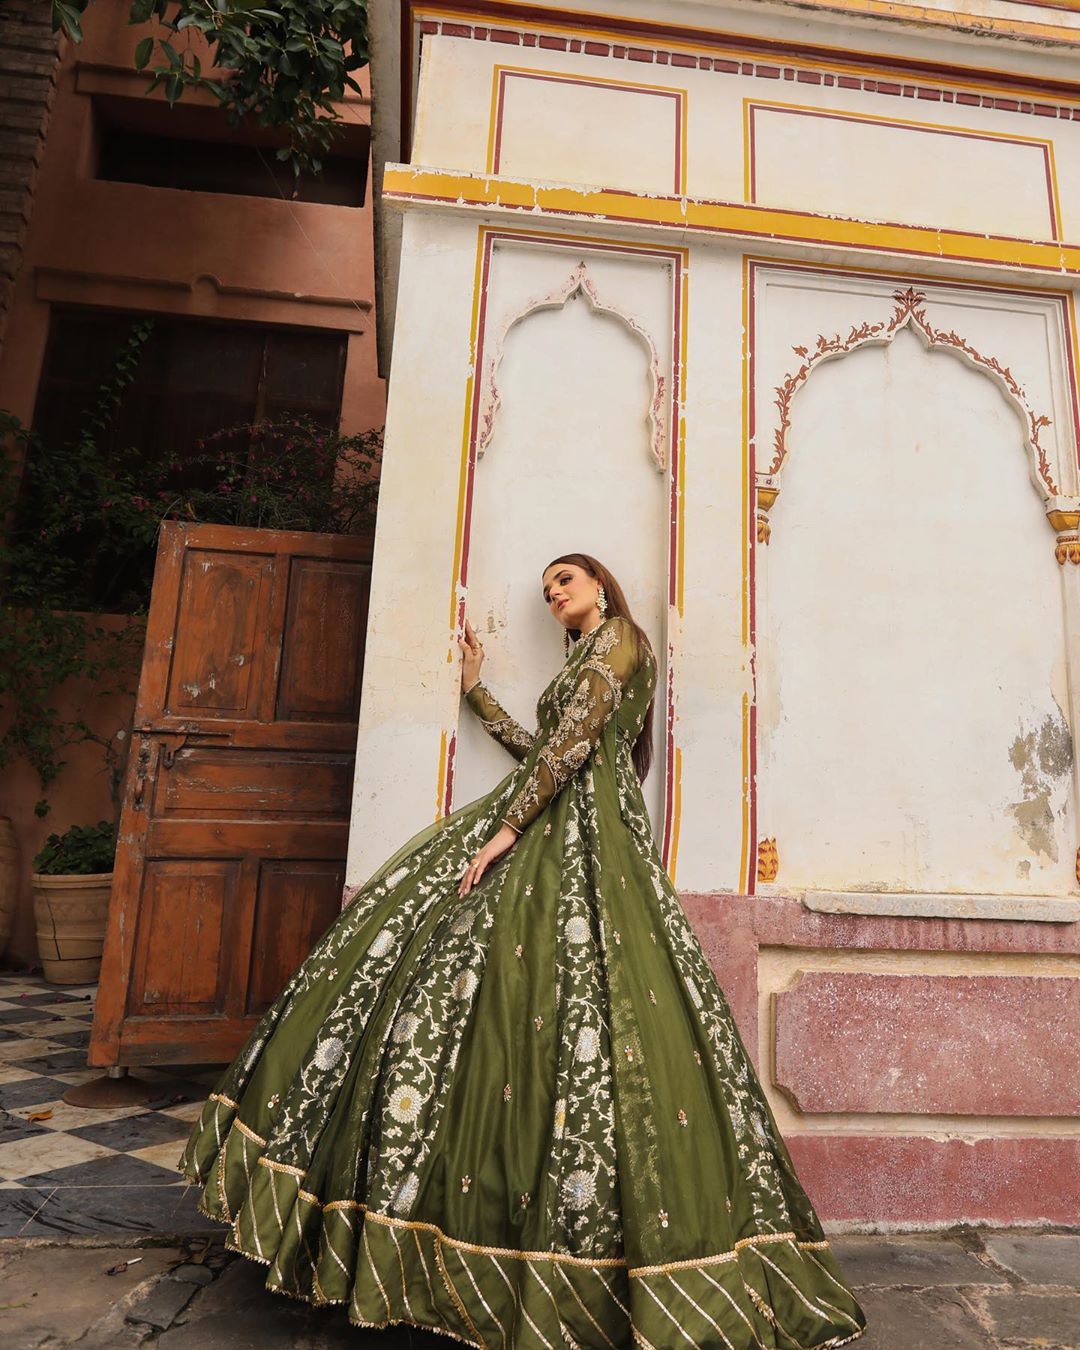 Hira Mani is Looking Beautiful and Gorgeous in Her Latest Bridal Shoot